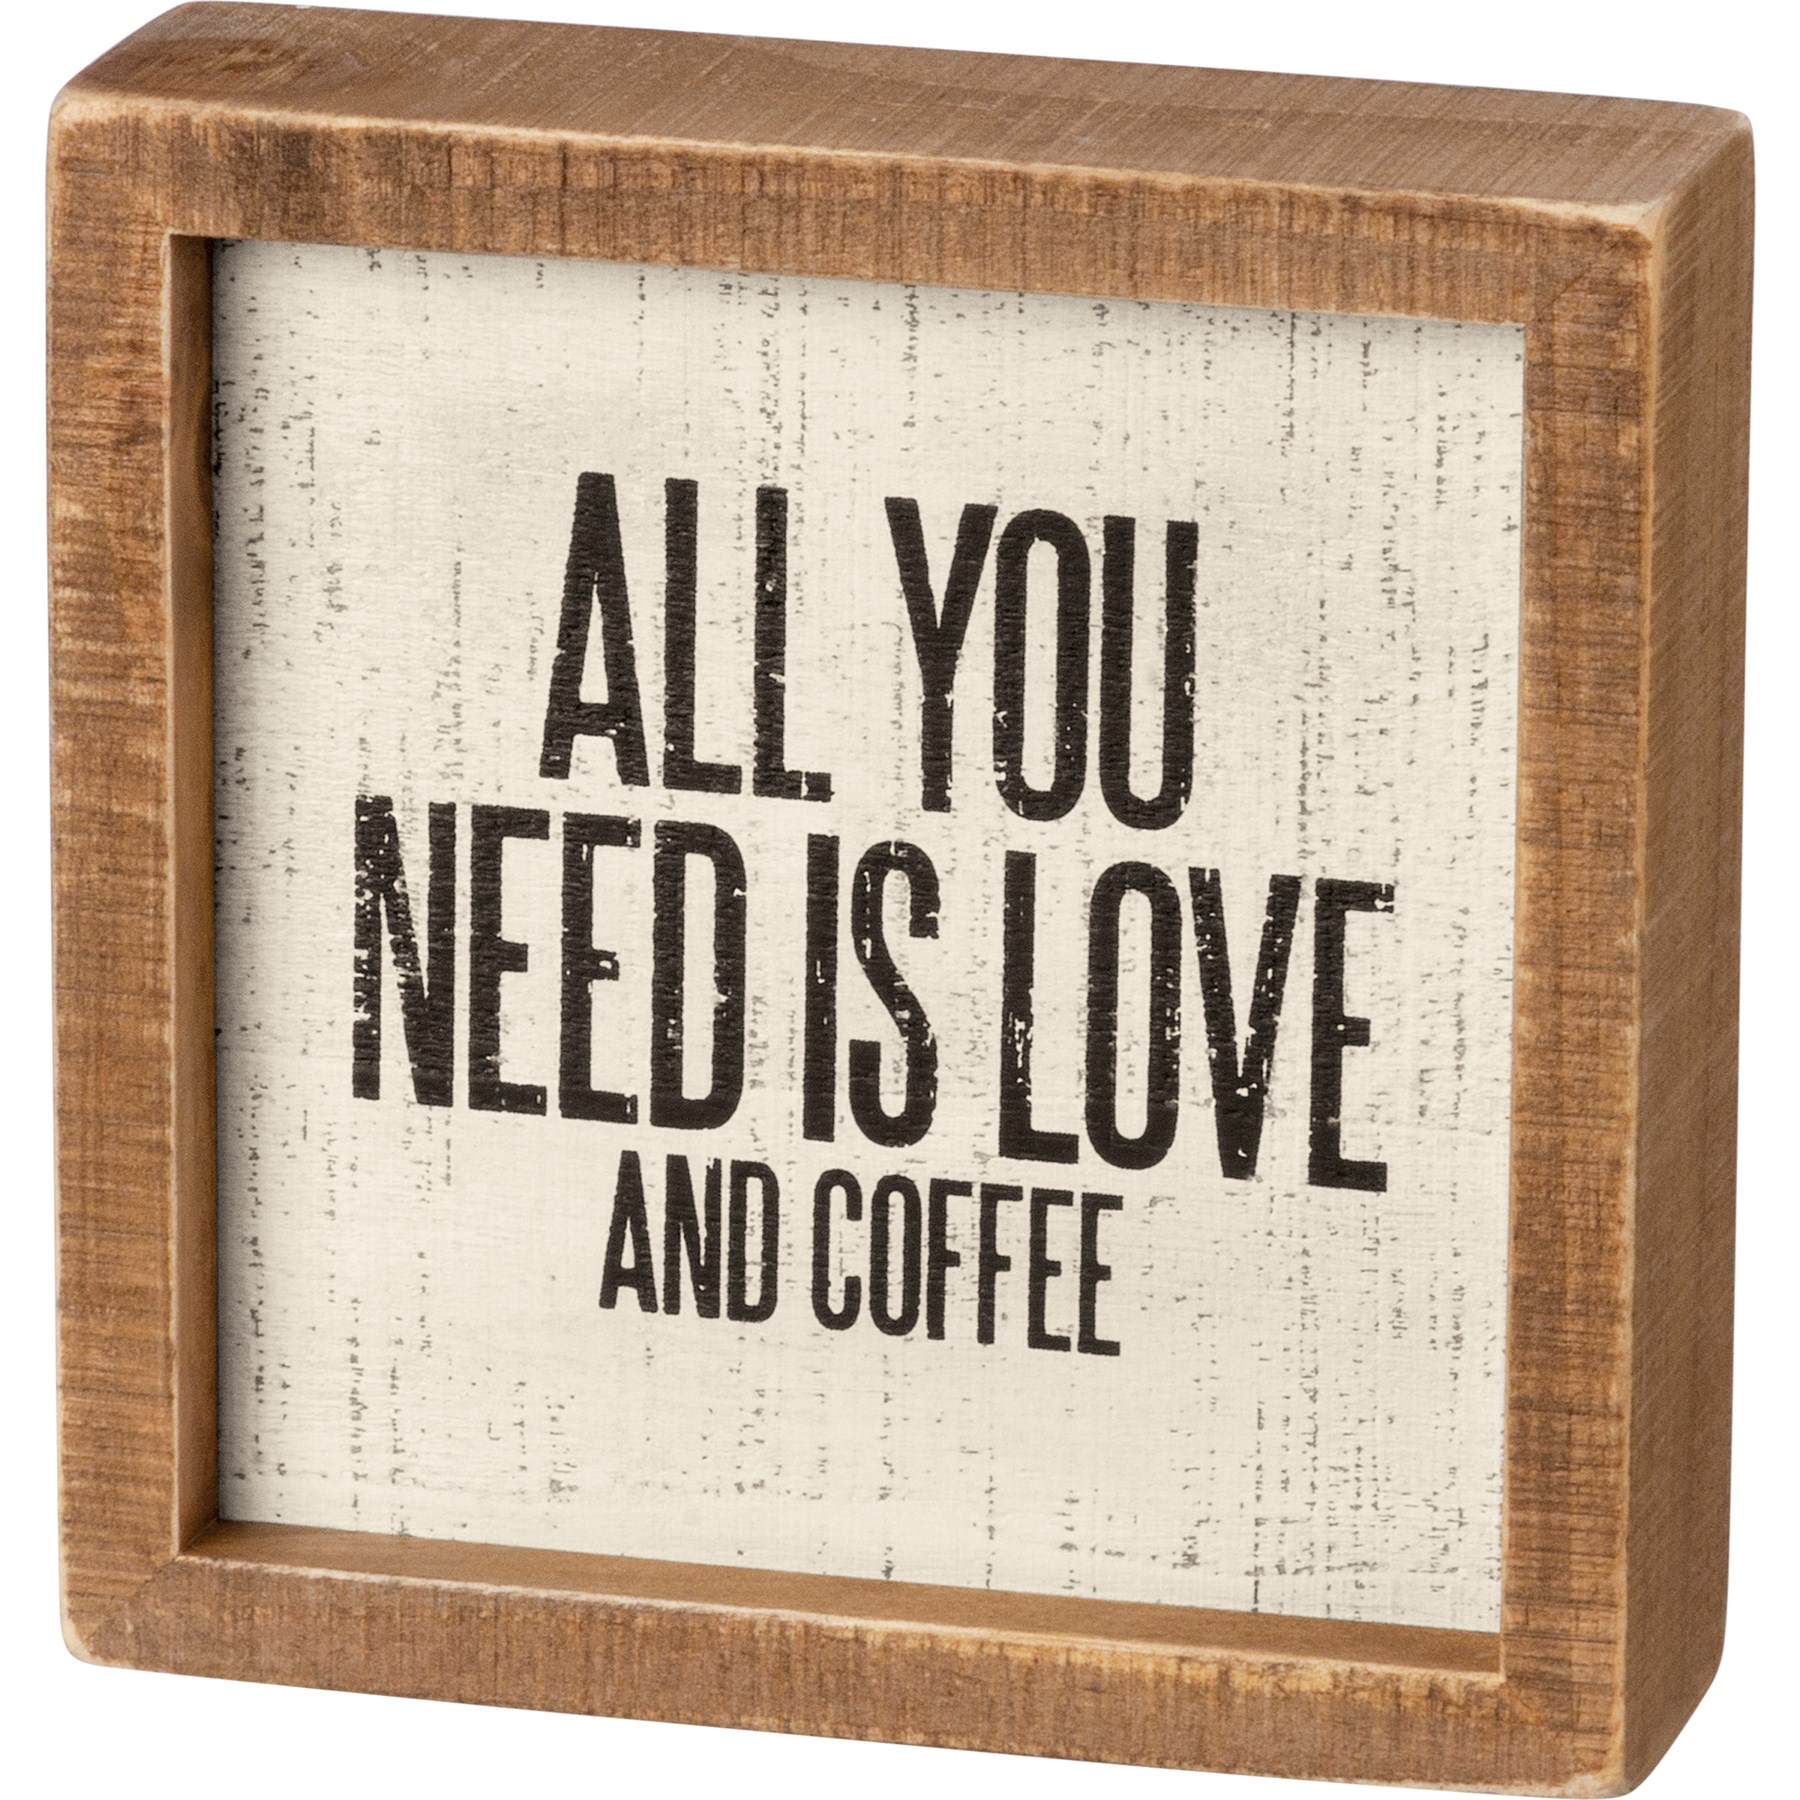 Primitives by Kathy ALL YOU NEED IS LOVE.. AND CHOCOLATE Box Sign 2.5" x 6"